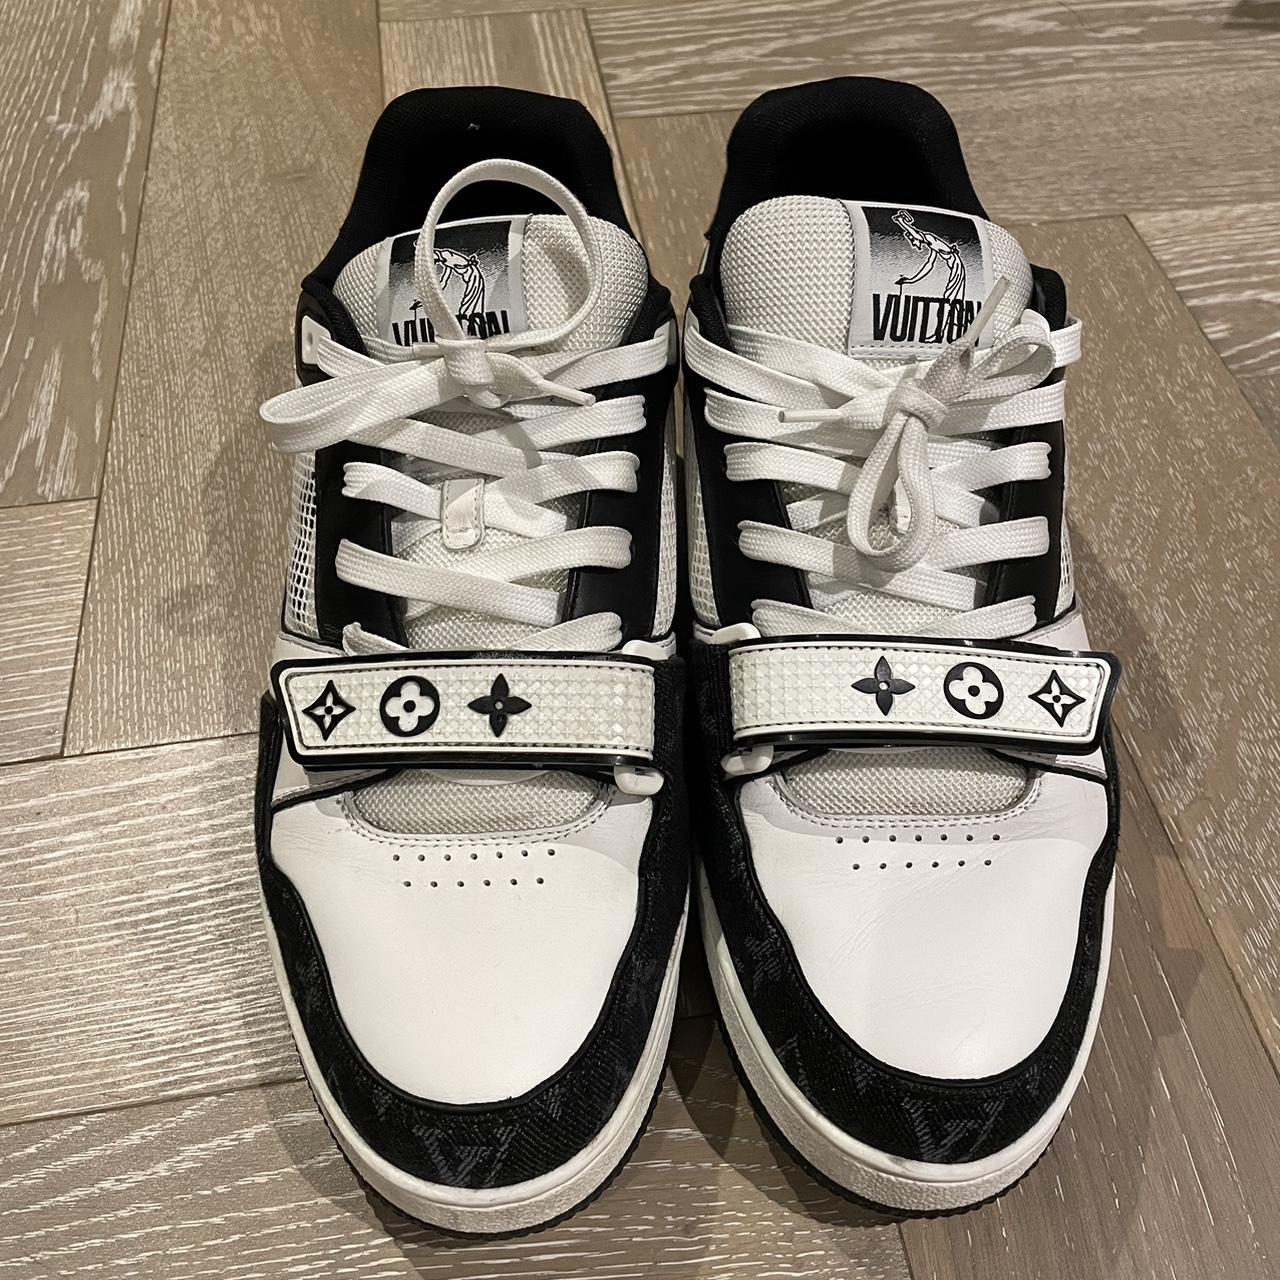 Lv Trainers in Black Super rare and sought... - Depop